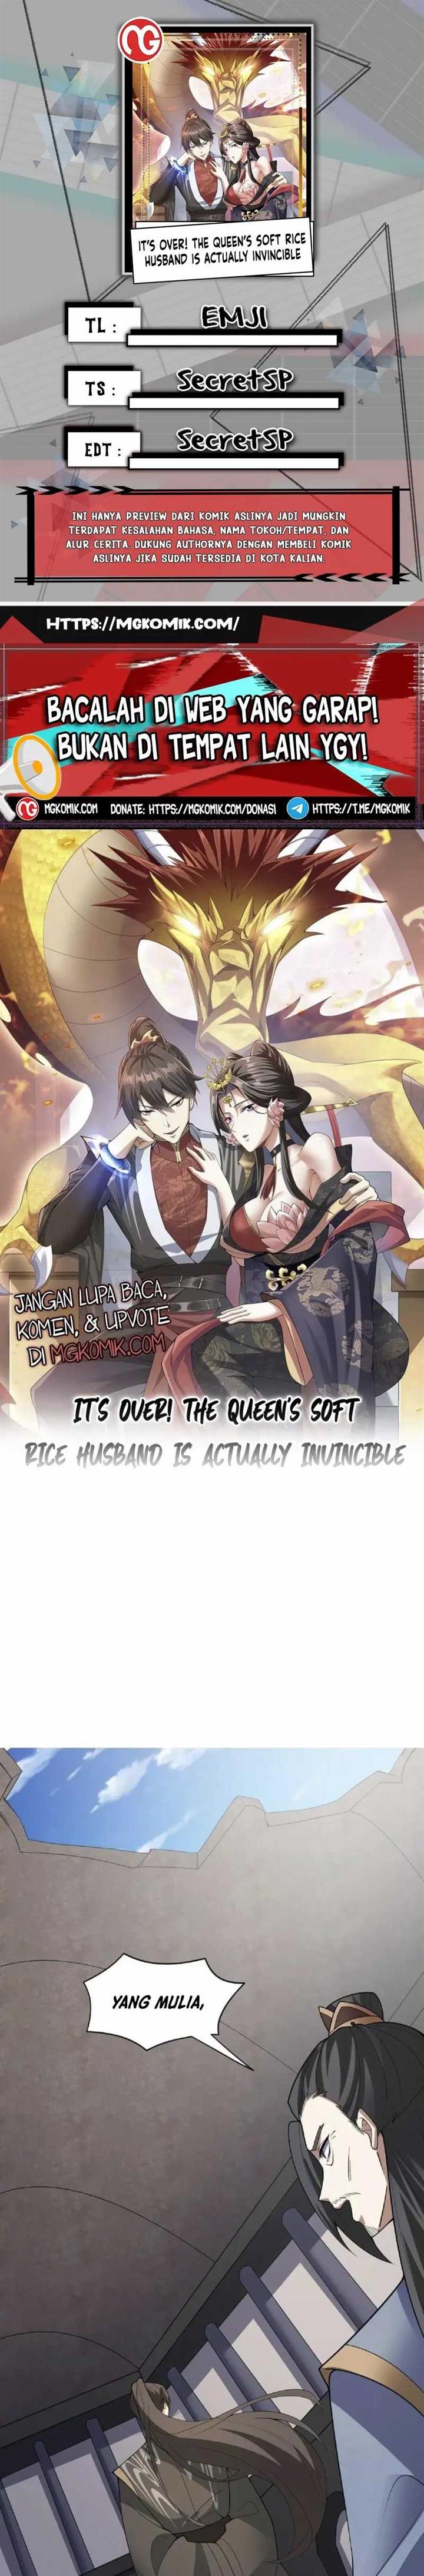 It’s Over! The Queen’s Soft Rice Husband is Actually Invincible Chapter 57